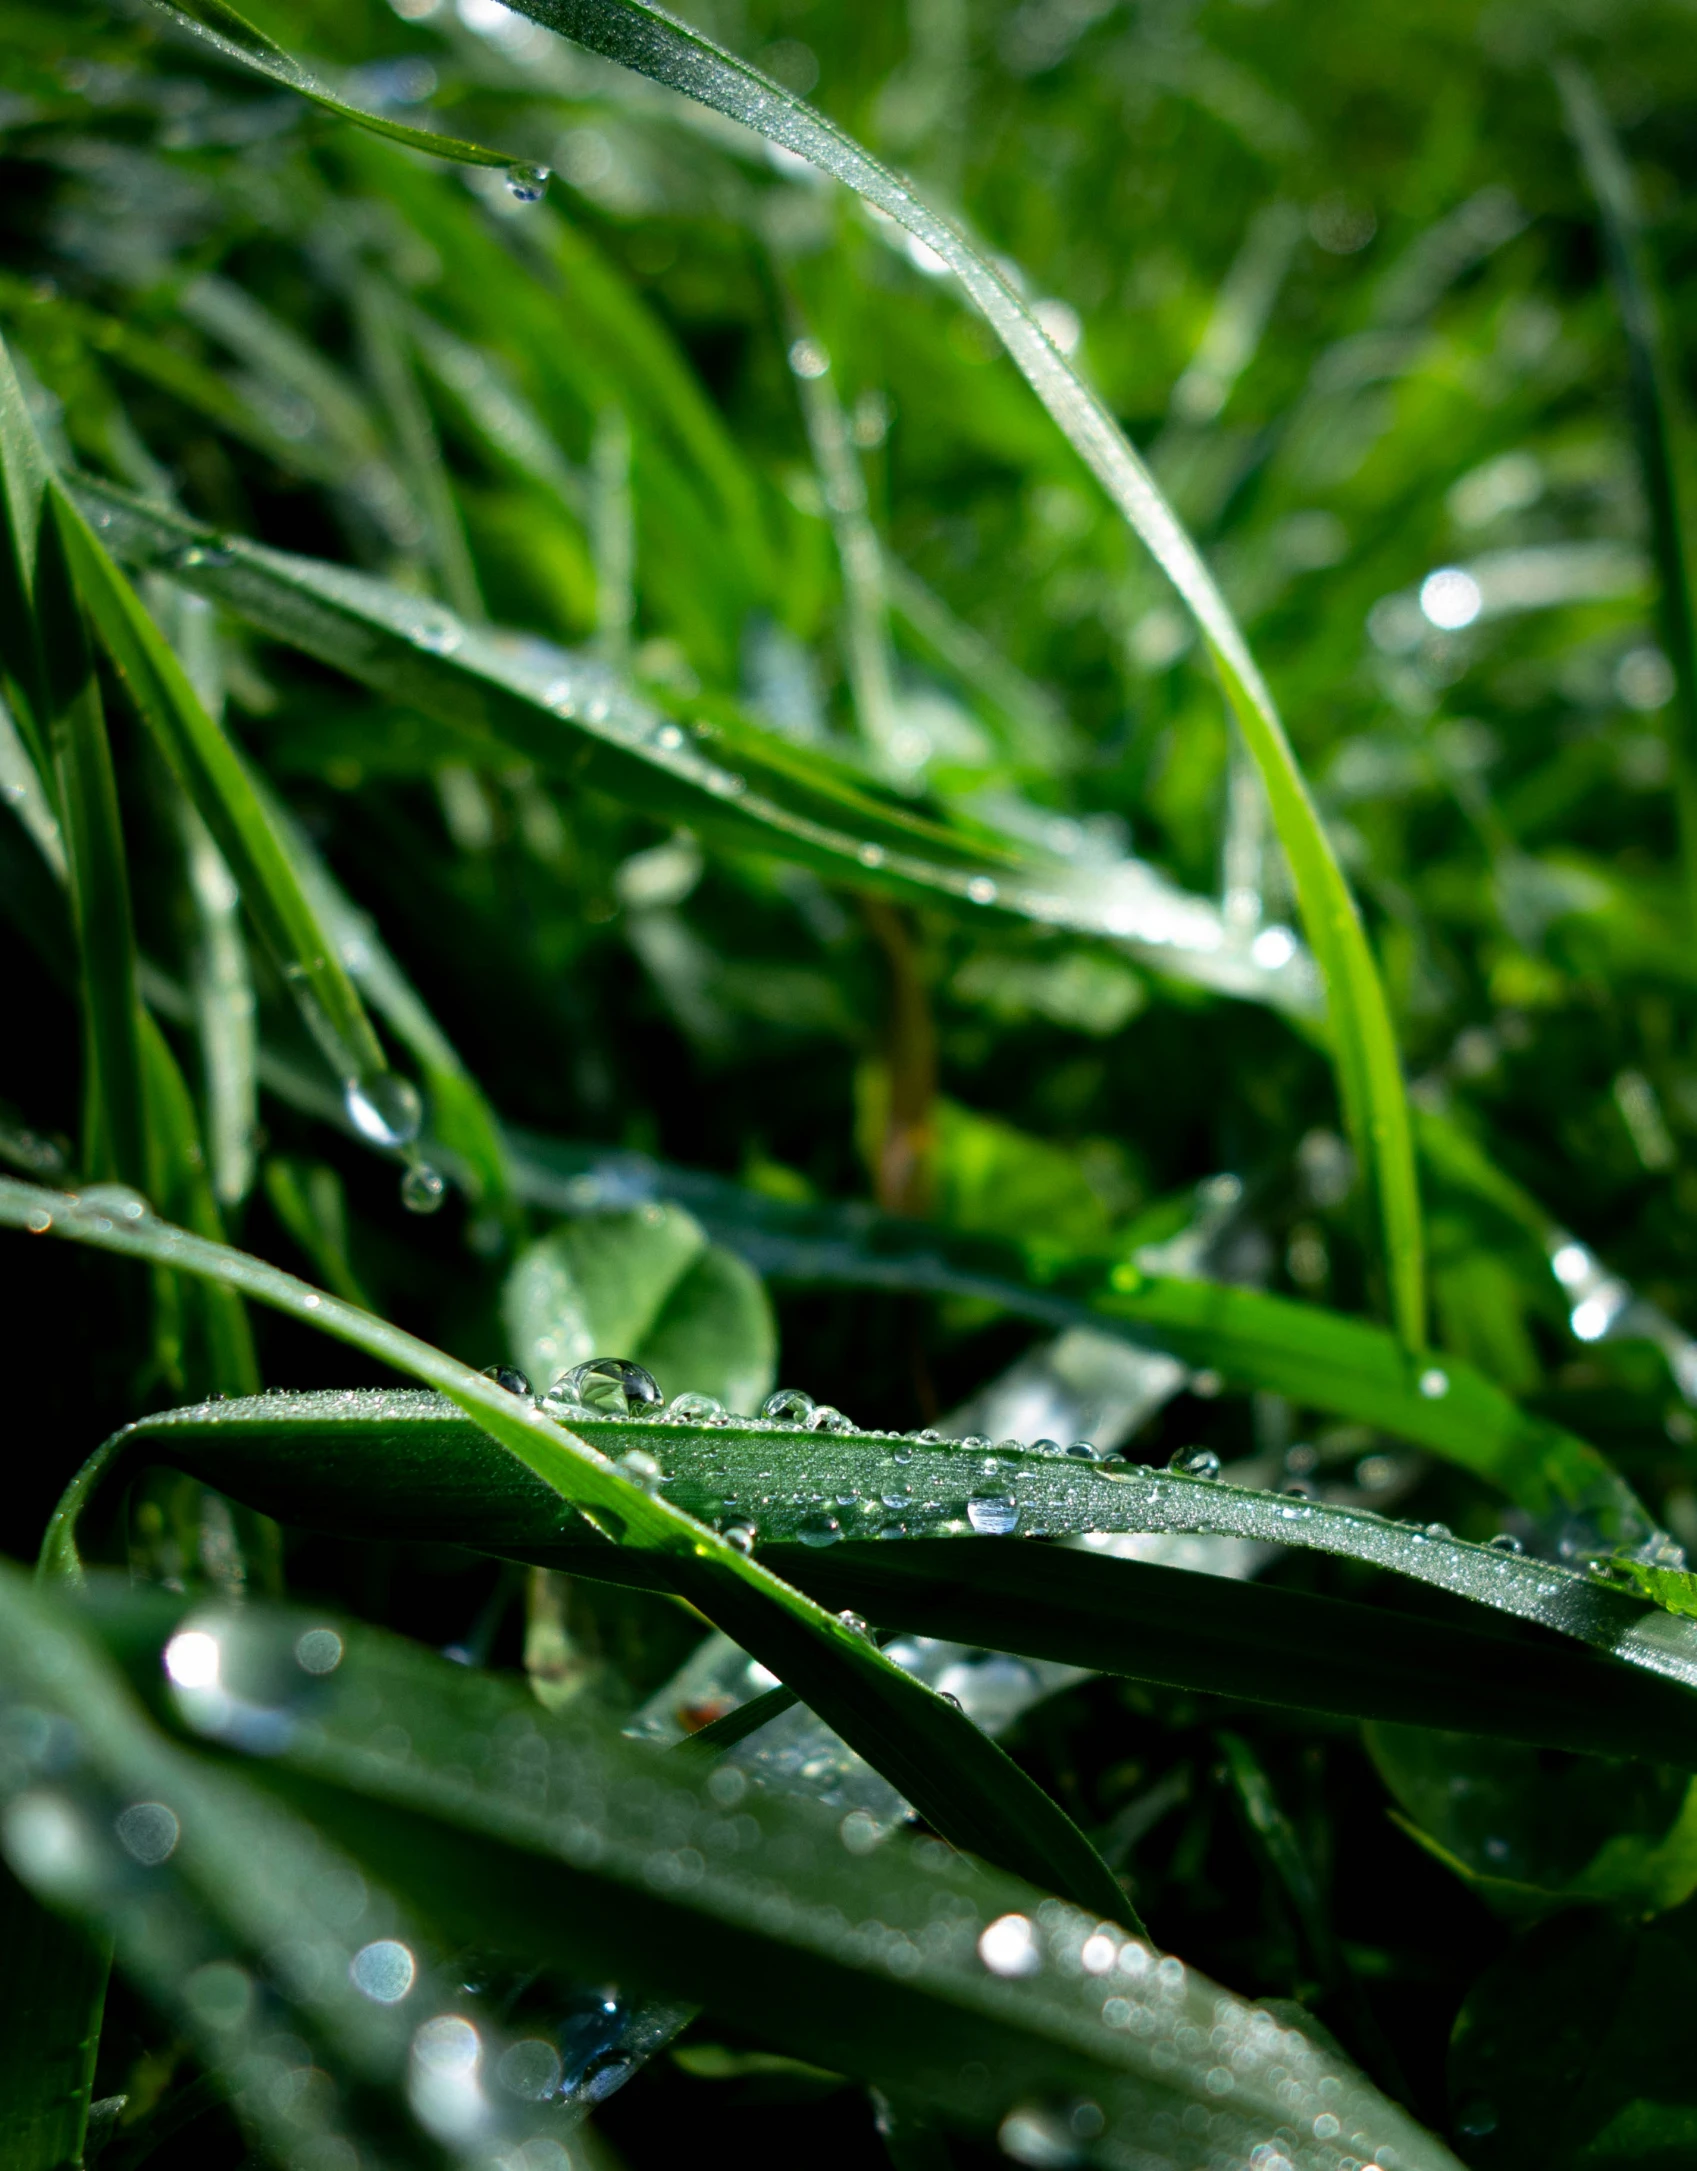 drops of water on the blades of green grass